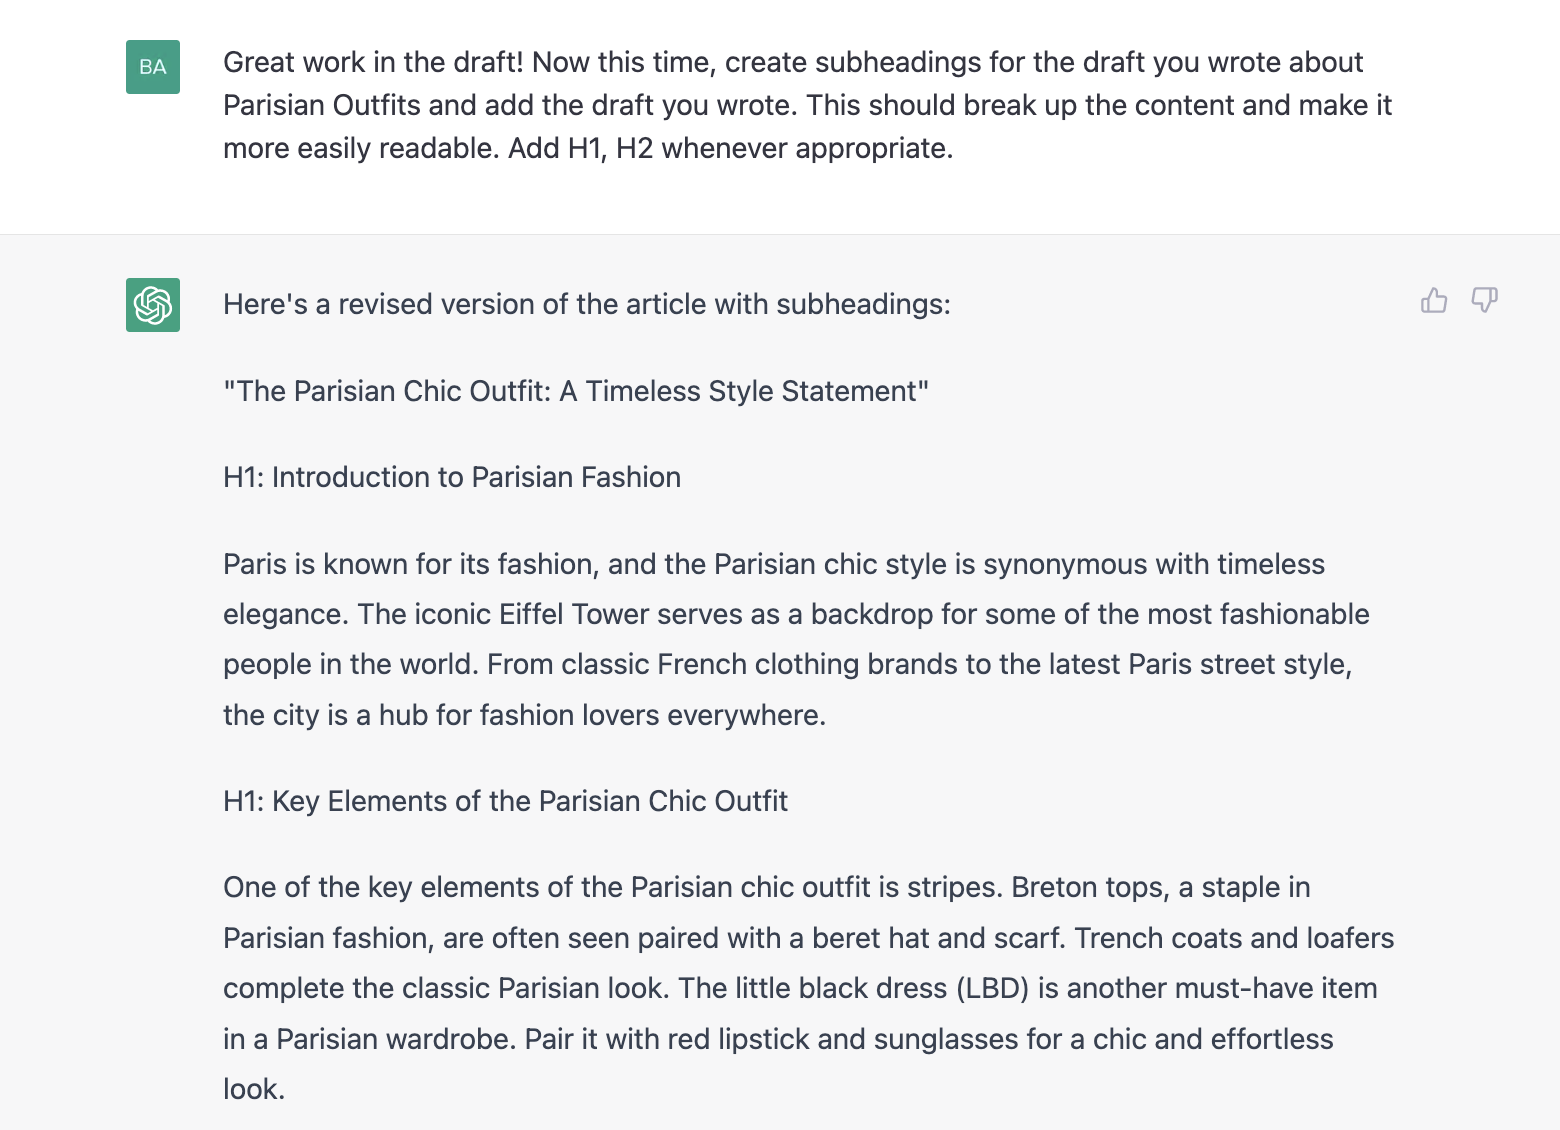 ChatGPT prompt about creating subheadings for the draft about Parisian outfits